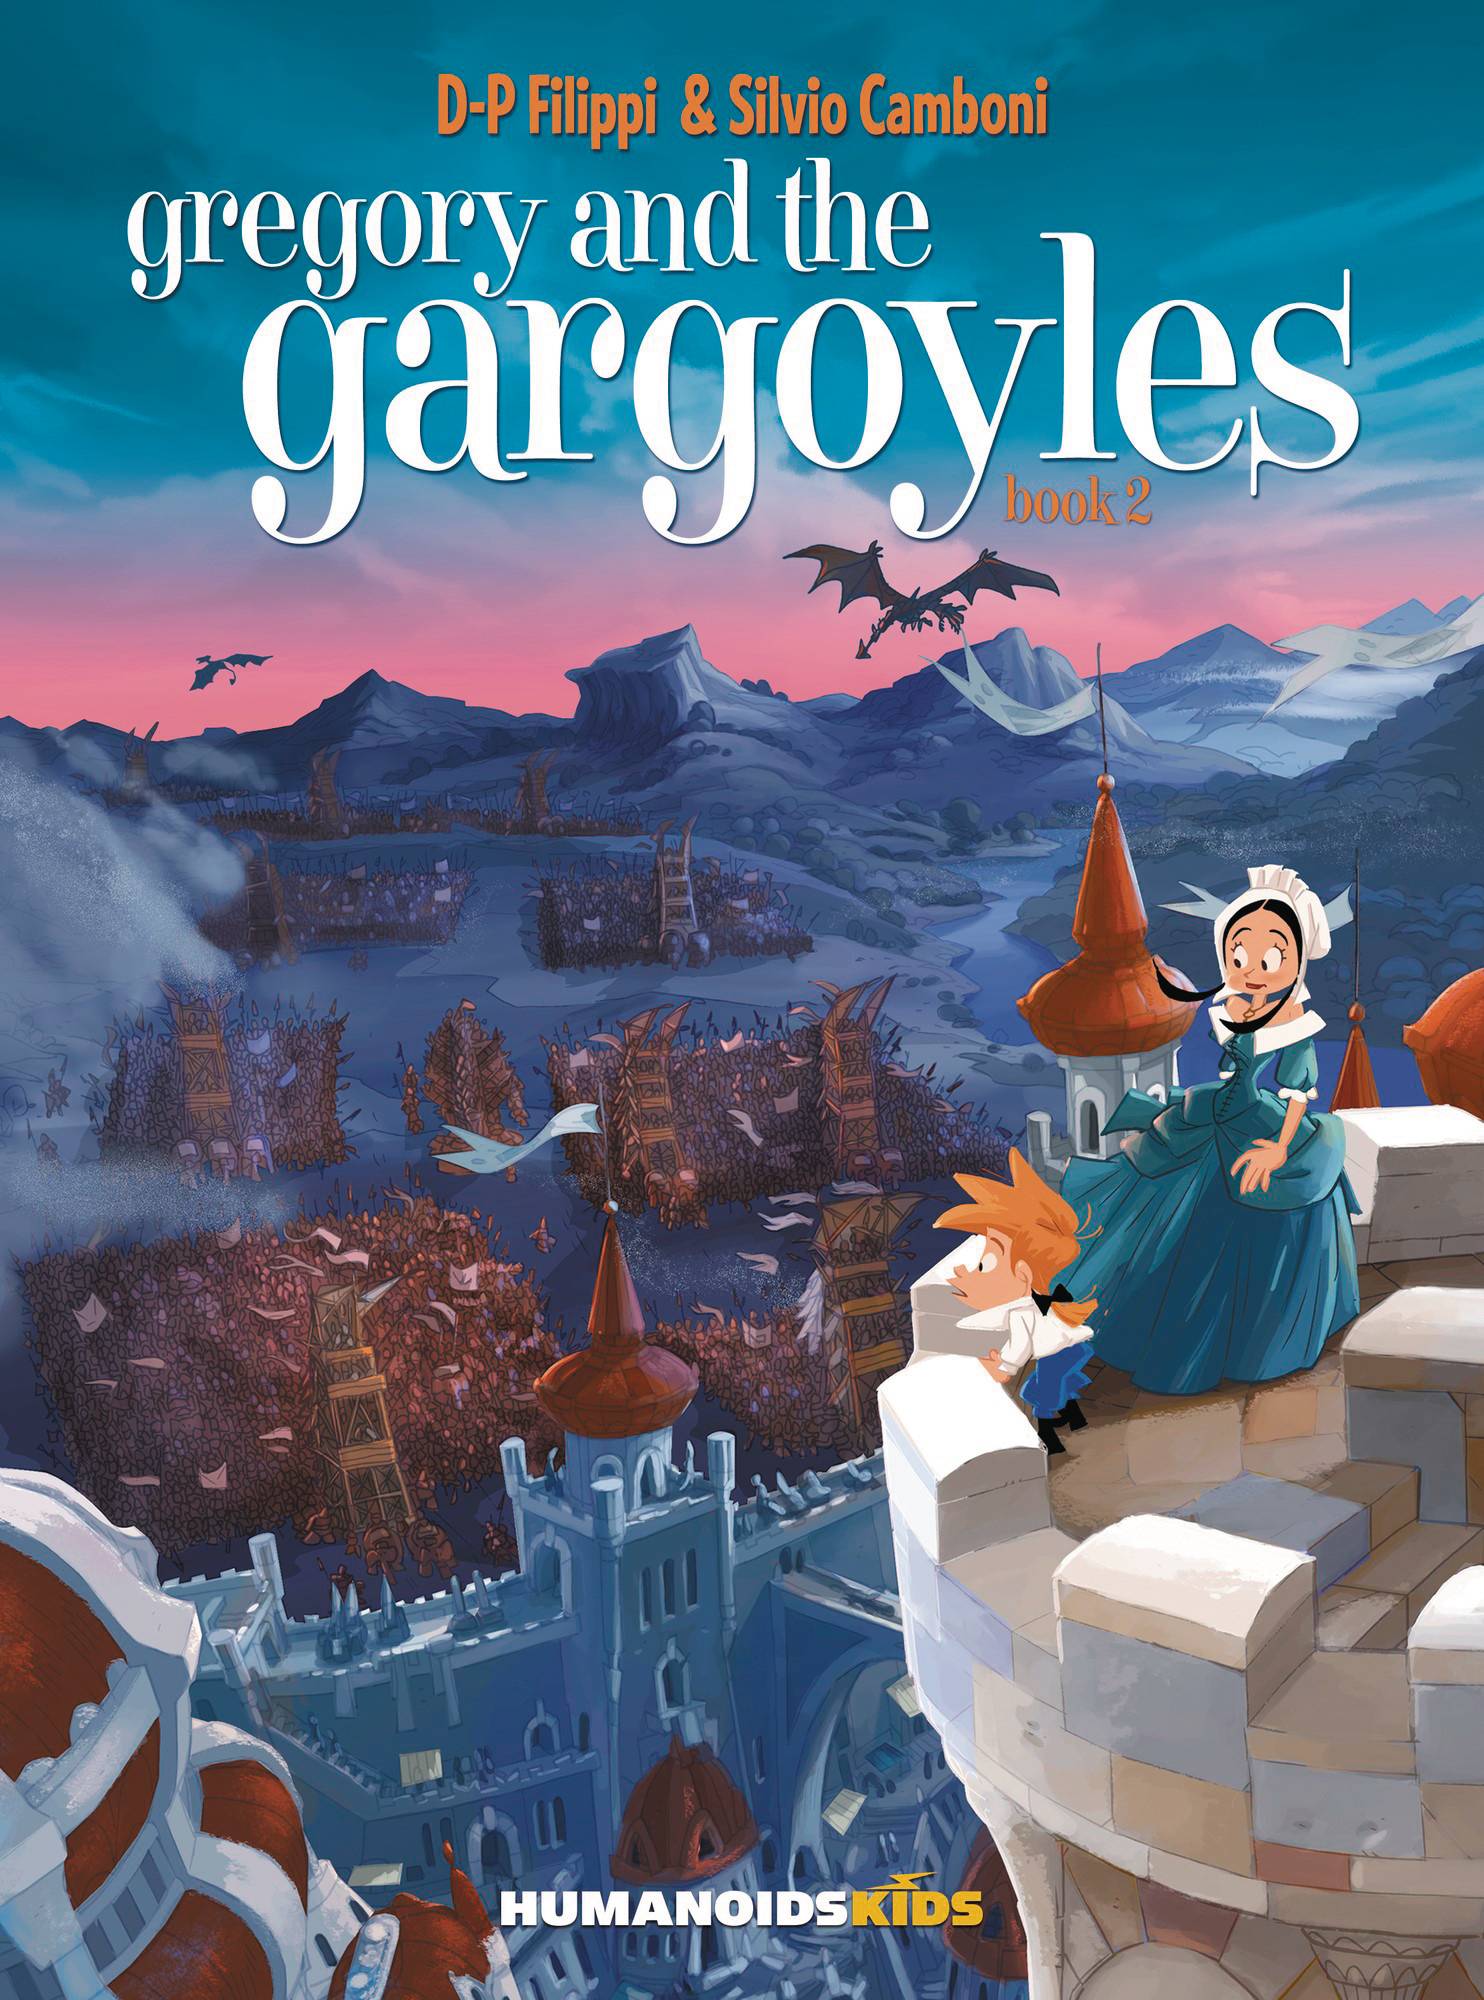 Gregory and the Gargoyles Hardcover Volume 2 (Of 3)